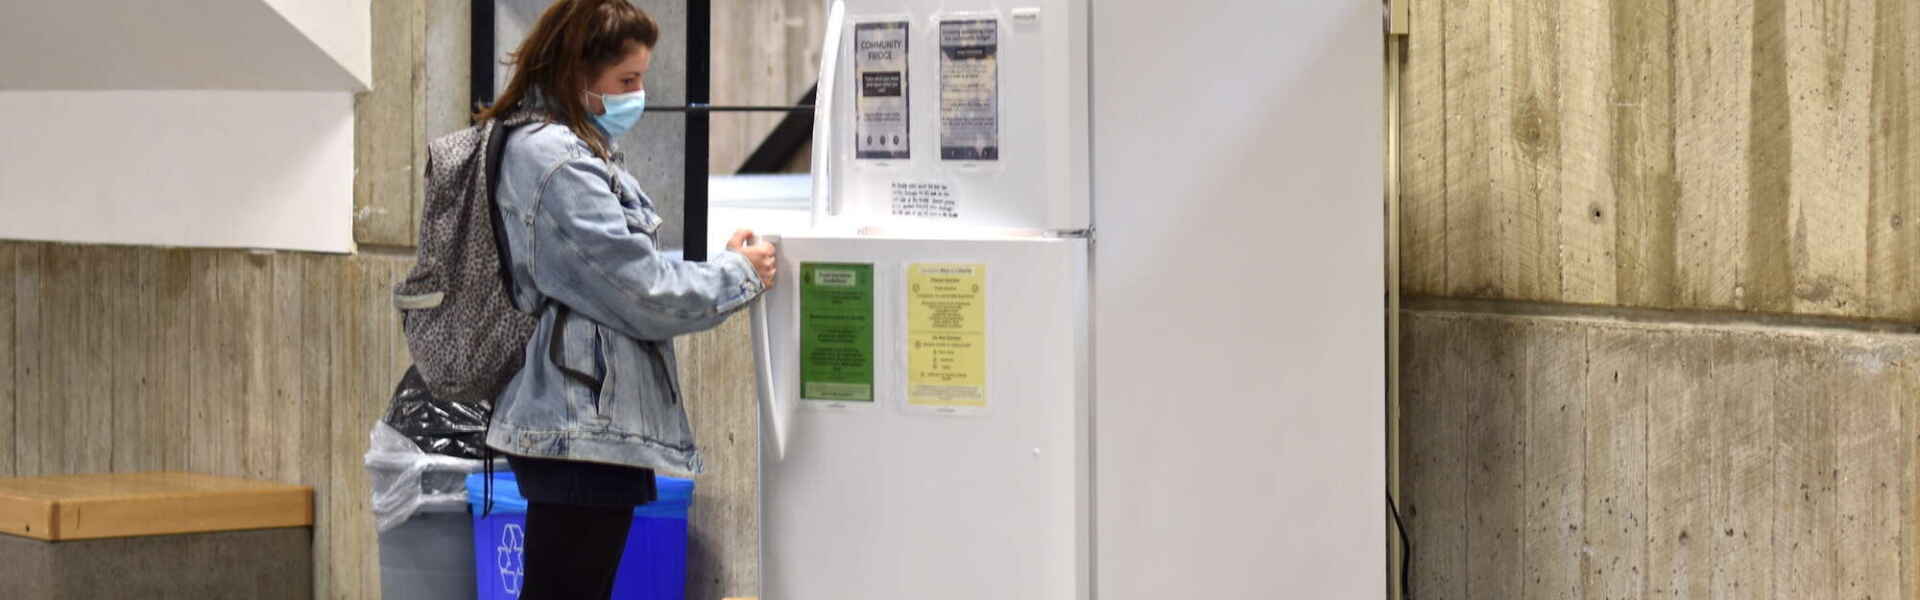 A student is shown opening the door of the community fridge